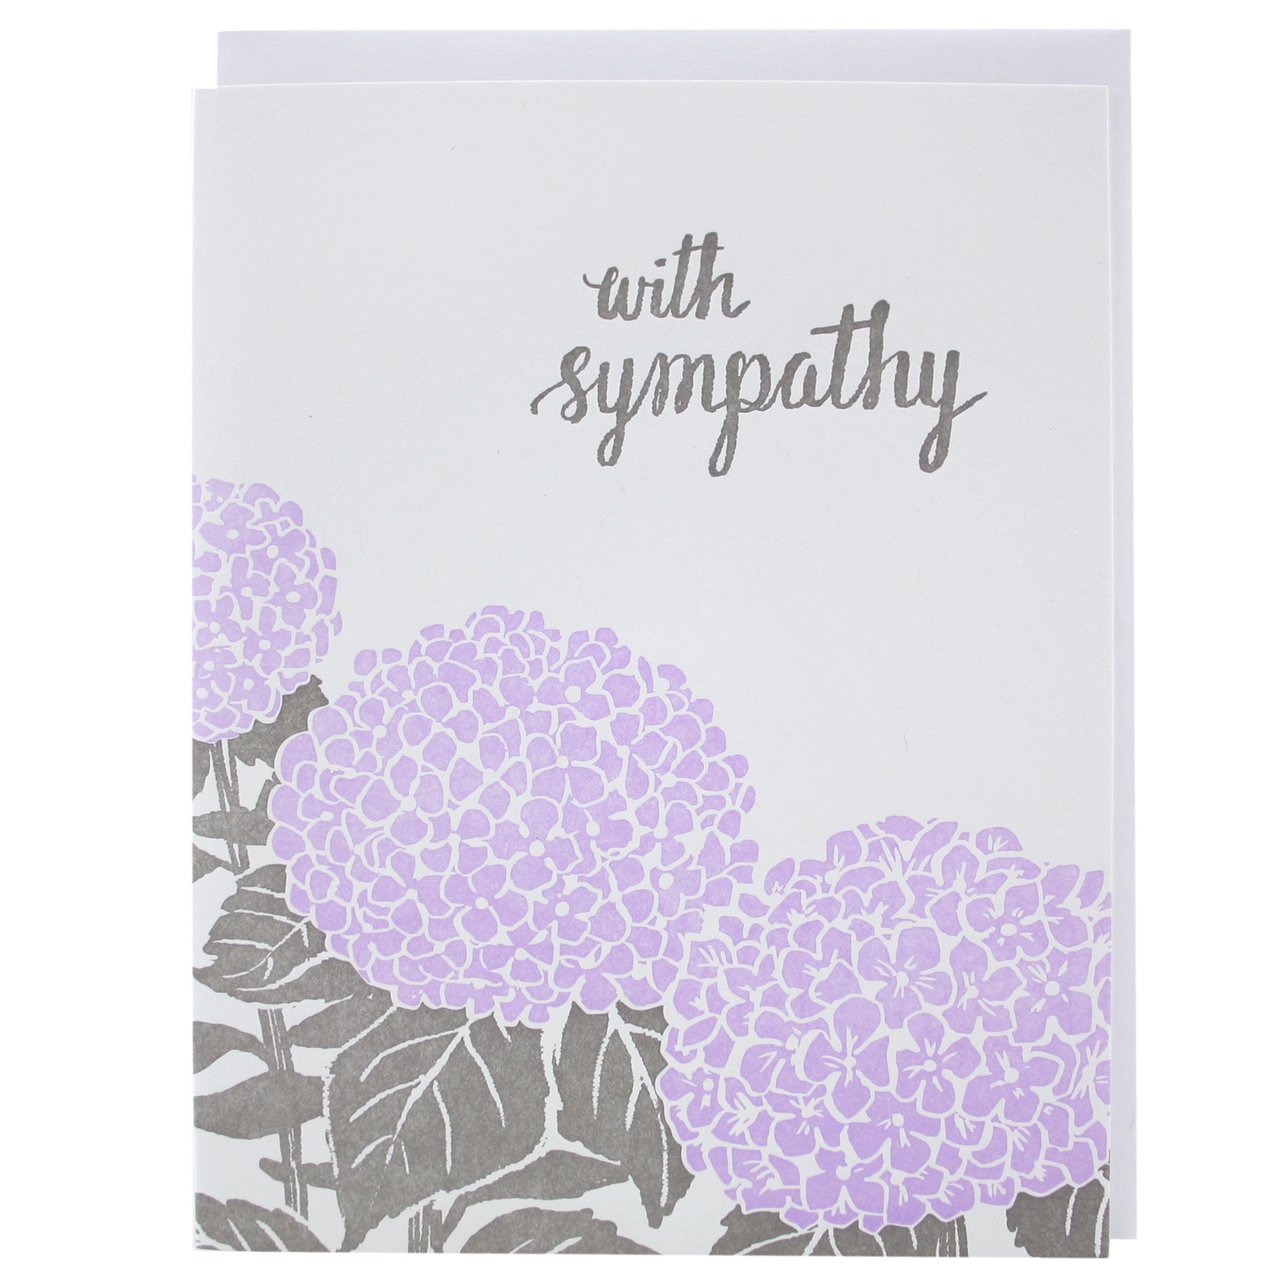 Light purple card with gray text saying, “With Sympathy”. Images of purple hydrangeas with gray leaves. A light purple envelope is included.